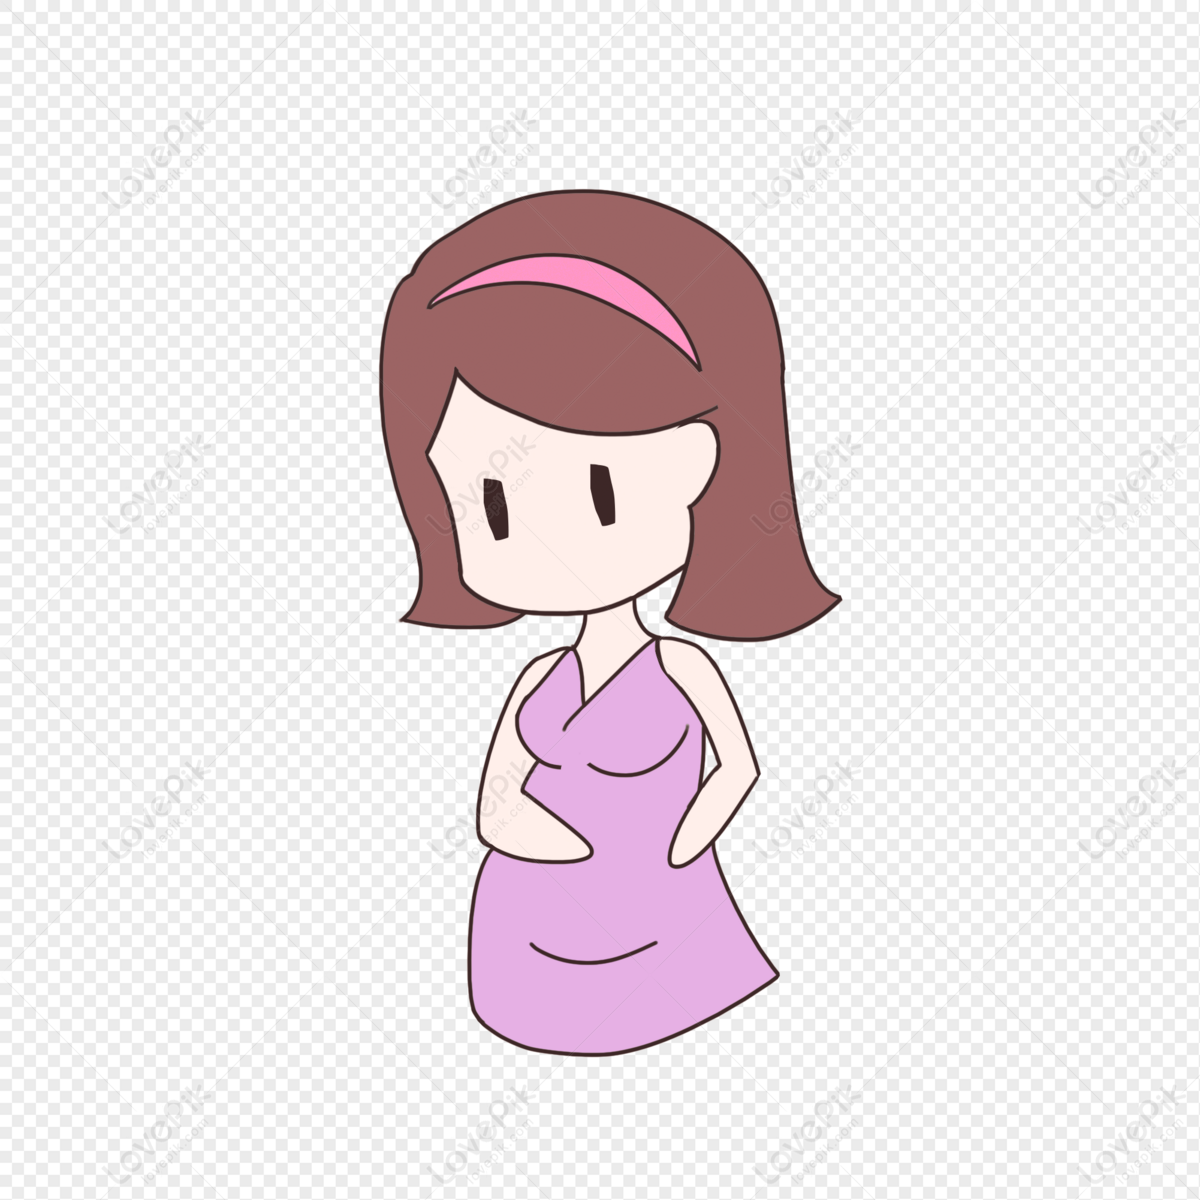 Hand Drawn Cartoon Mothers Day Pregnant Purple Dress Mom PNG Image Free  Download And Clipart Image For Free Download - Lovepik | 401220571